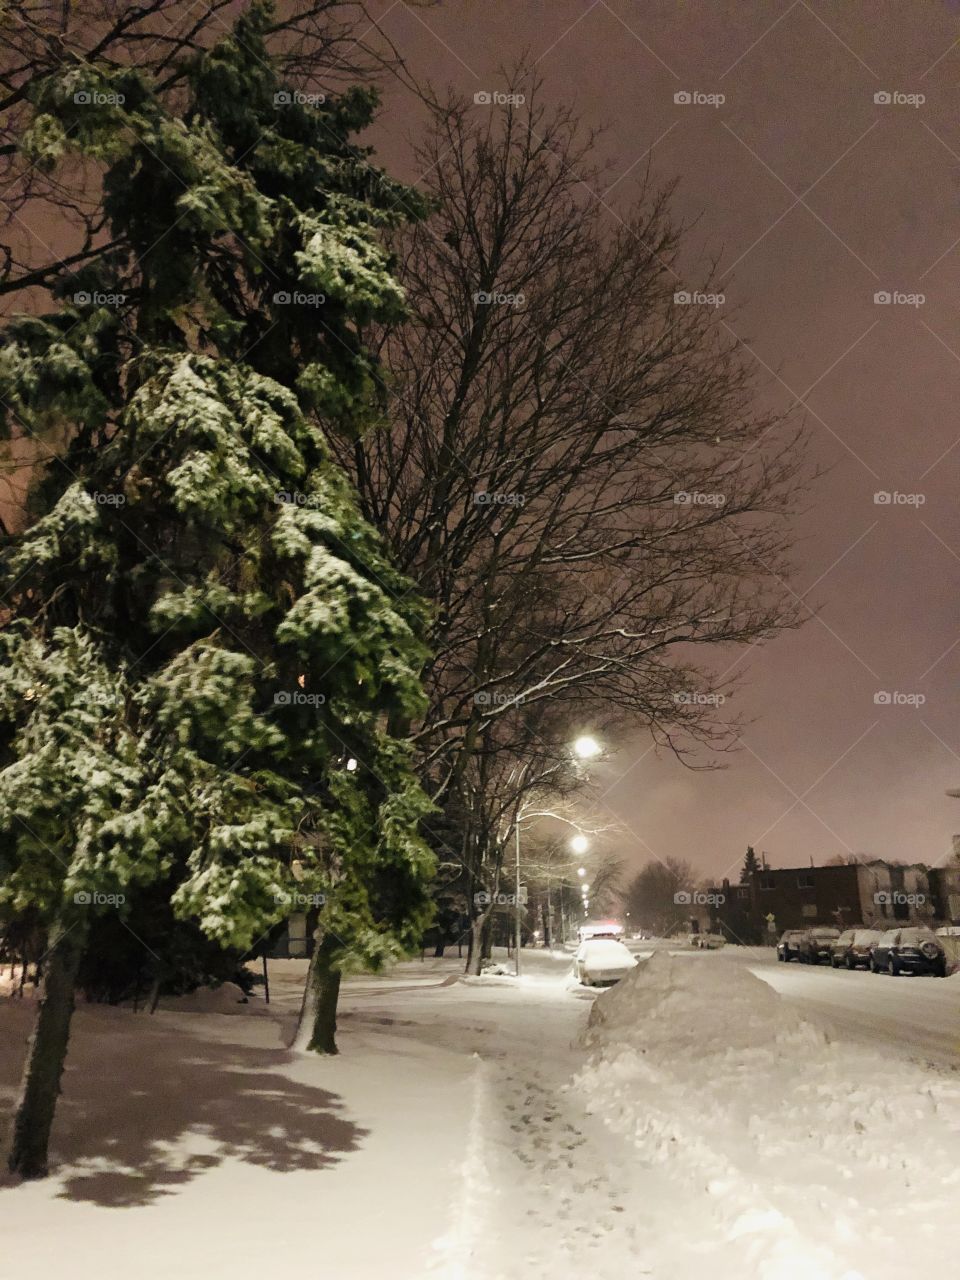 Snow Storm Night 05-January 08 2019-Montreal, Quebec, Canada 